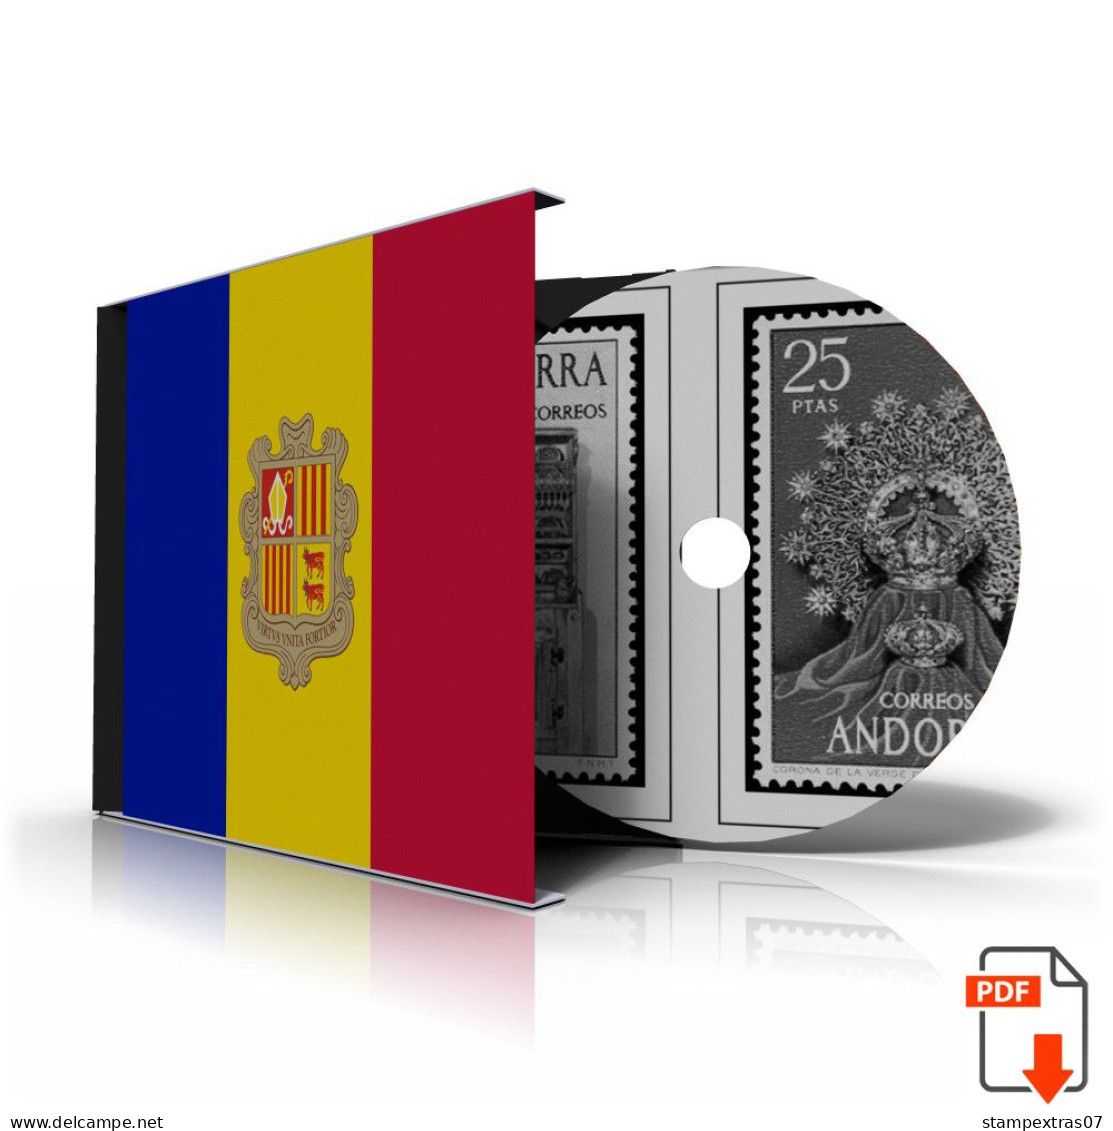 ANDORRA [FR. + SP.] 1875-2020 STAMP ALBUM PAGES (166 B&w Illustrated Pages) - Englisch